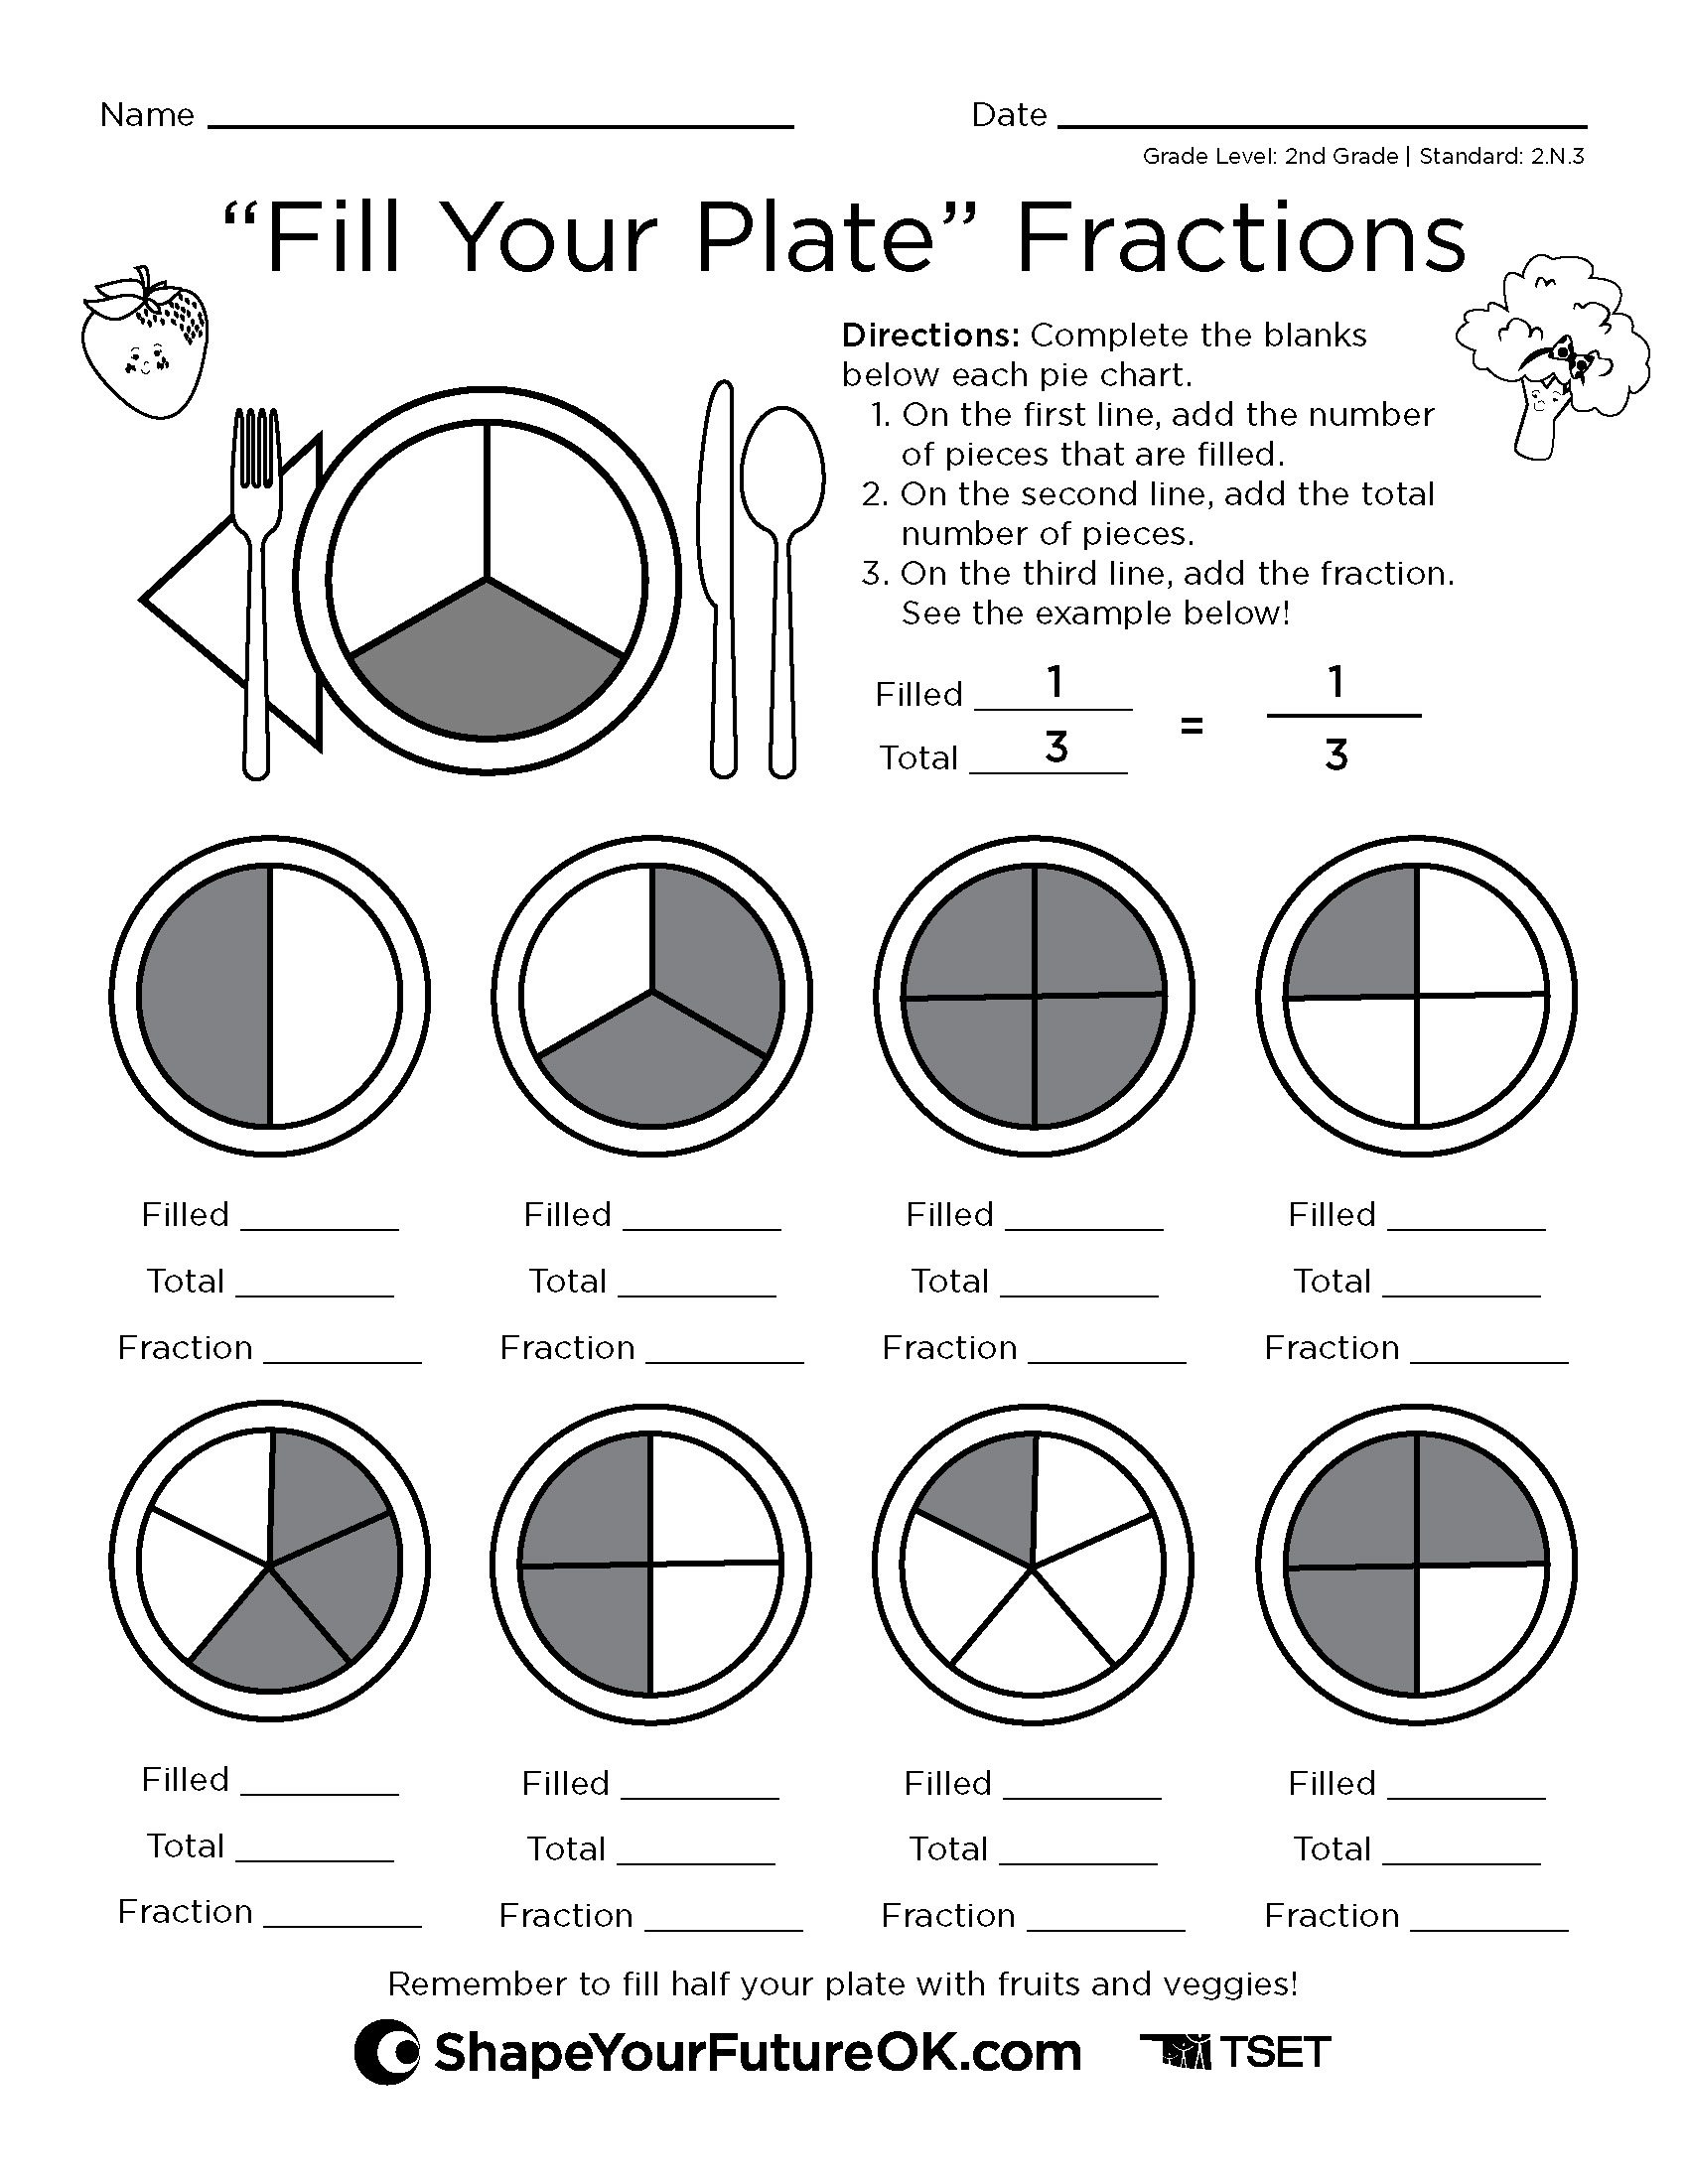 Fill Your Plate Fractions: 2nd Grade download